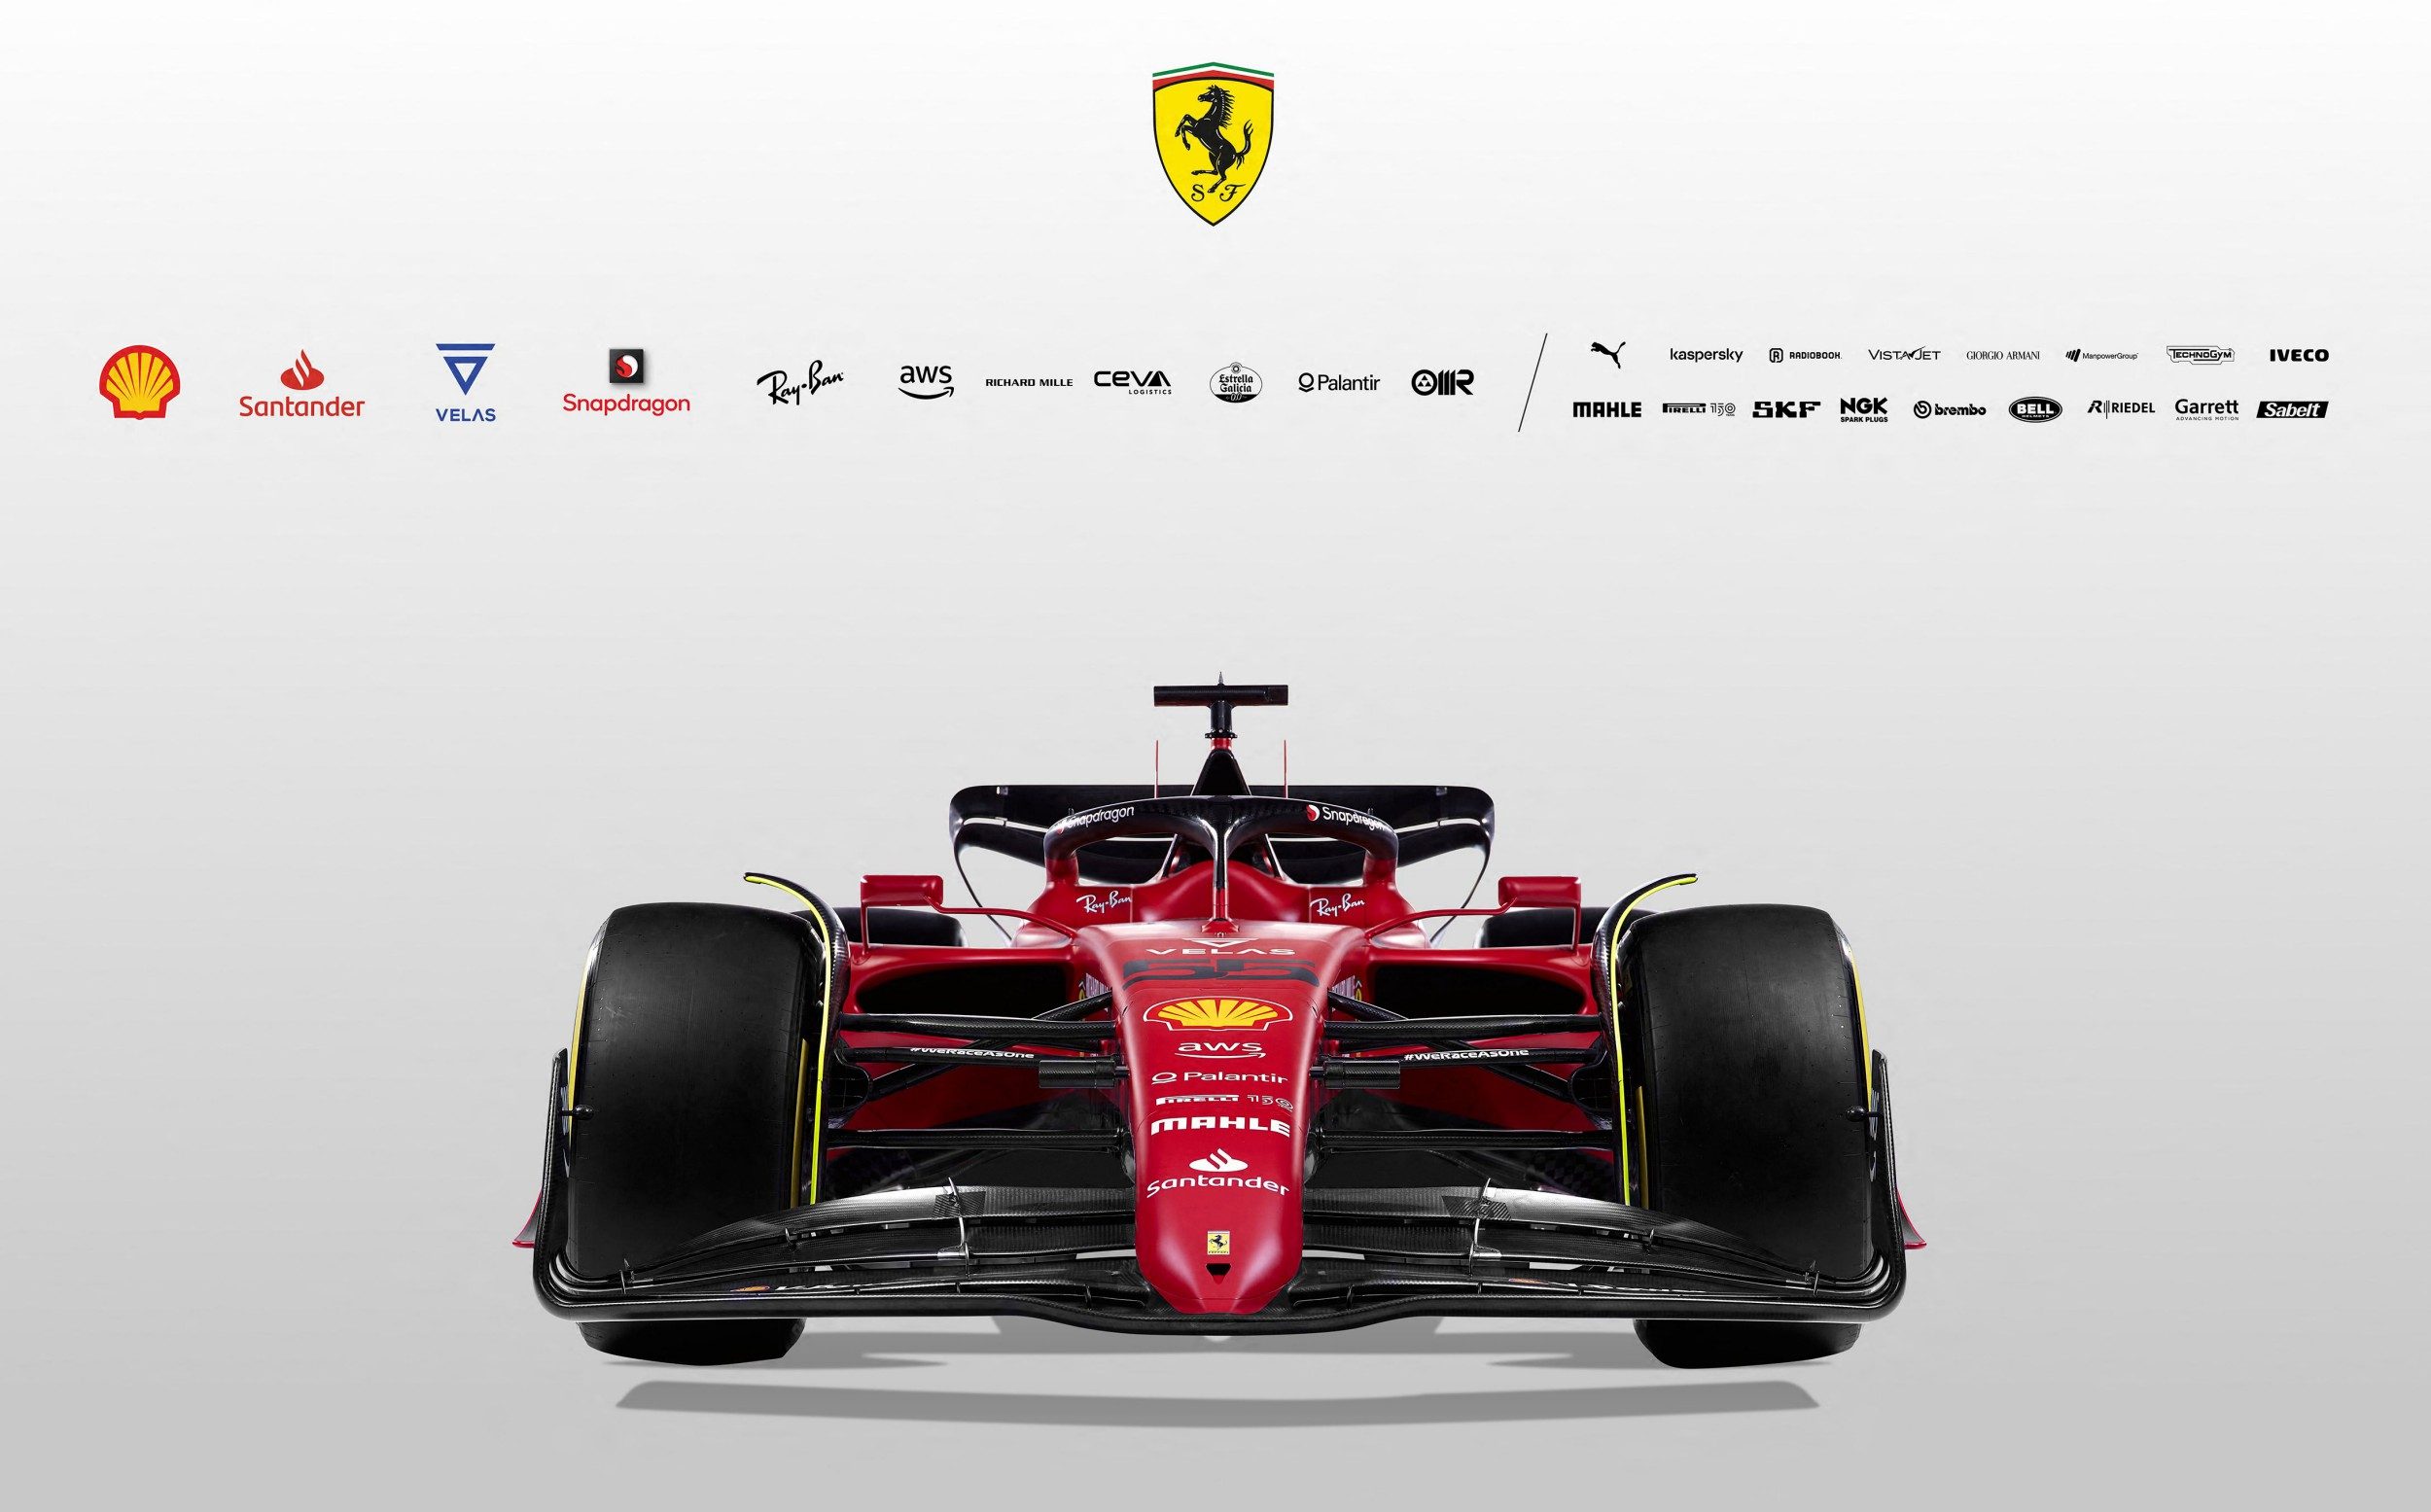 F1 2022 cars: The latest car and livery launches for the new season